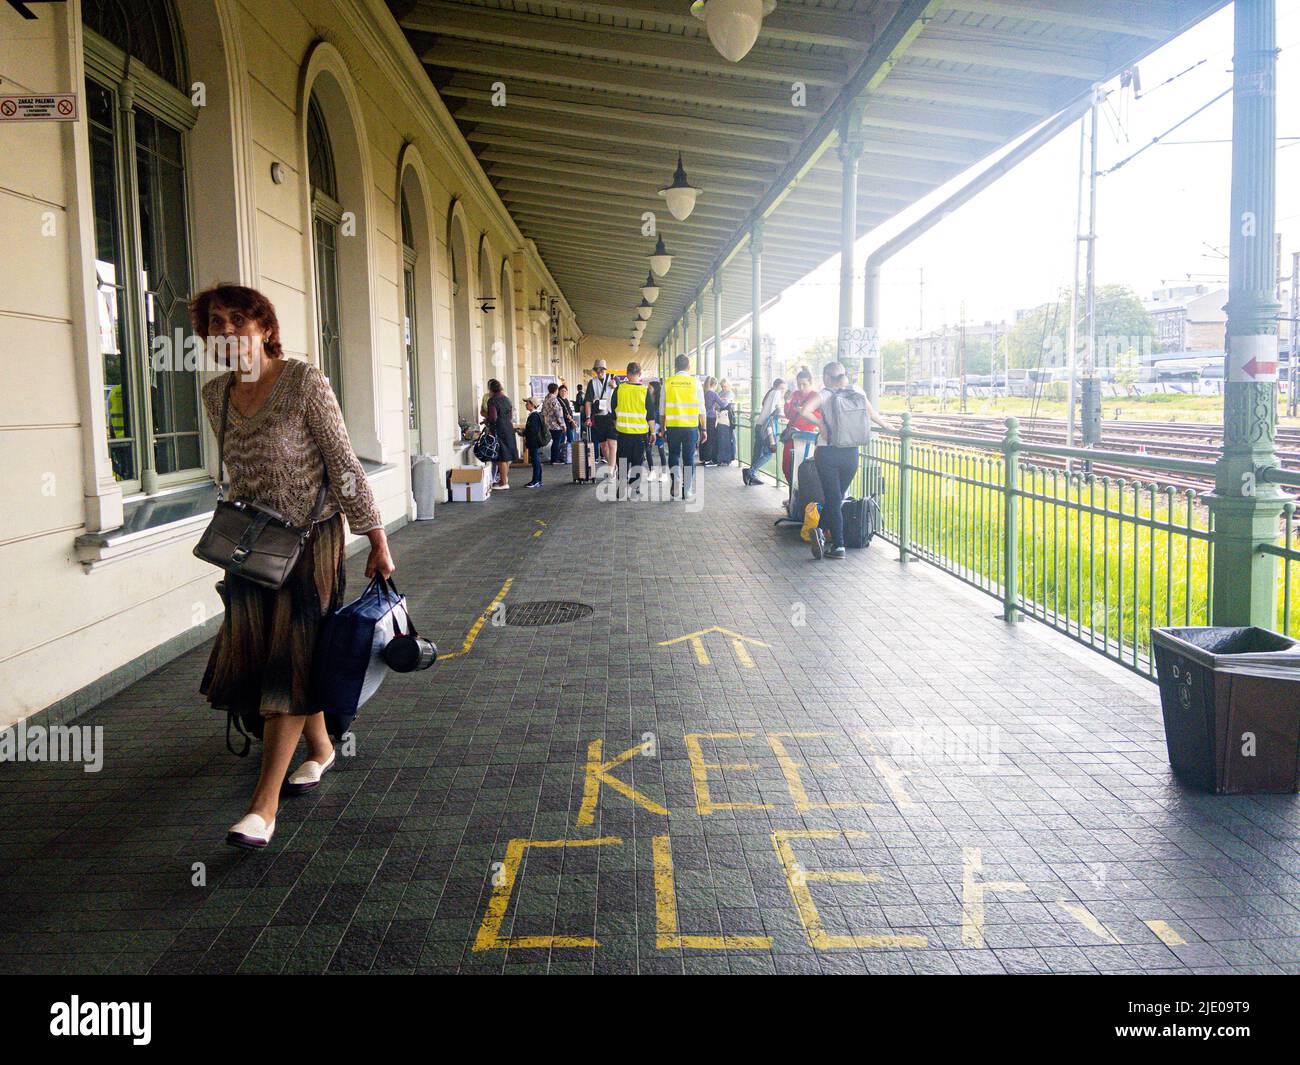 Przemysl, Poland. Railway Station, where Ukrainian Refugees and Victims of War first enter the European Union, on their way to a safe place from the Bombing and Shelling during the Russian Invasion. Stock Photo